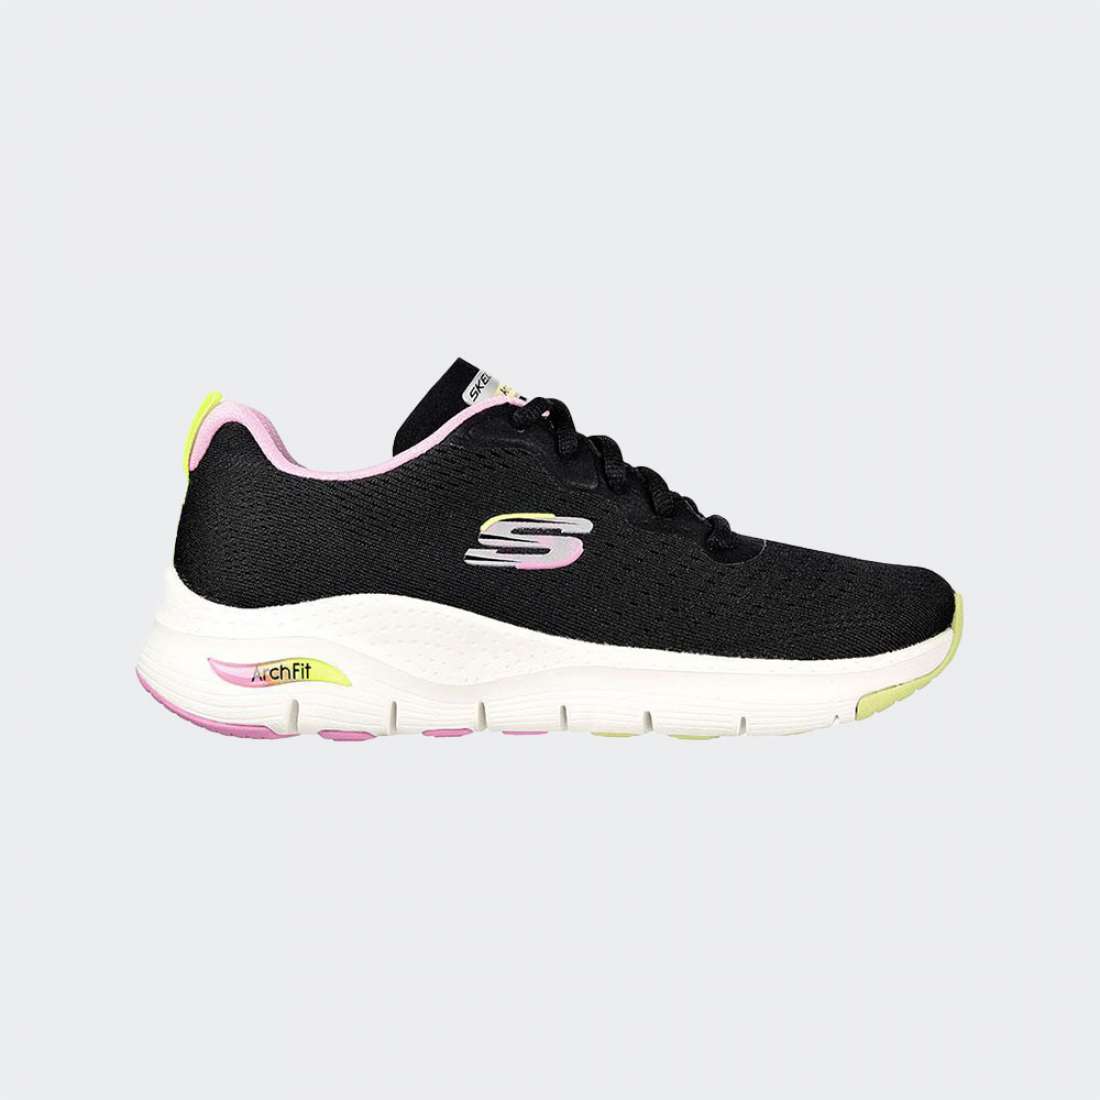 SKECHERS ARCH FIT INFINITY COOL BLACK/MULTI